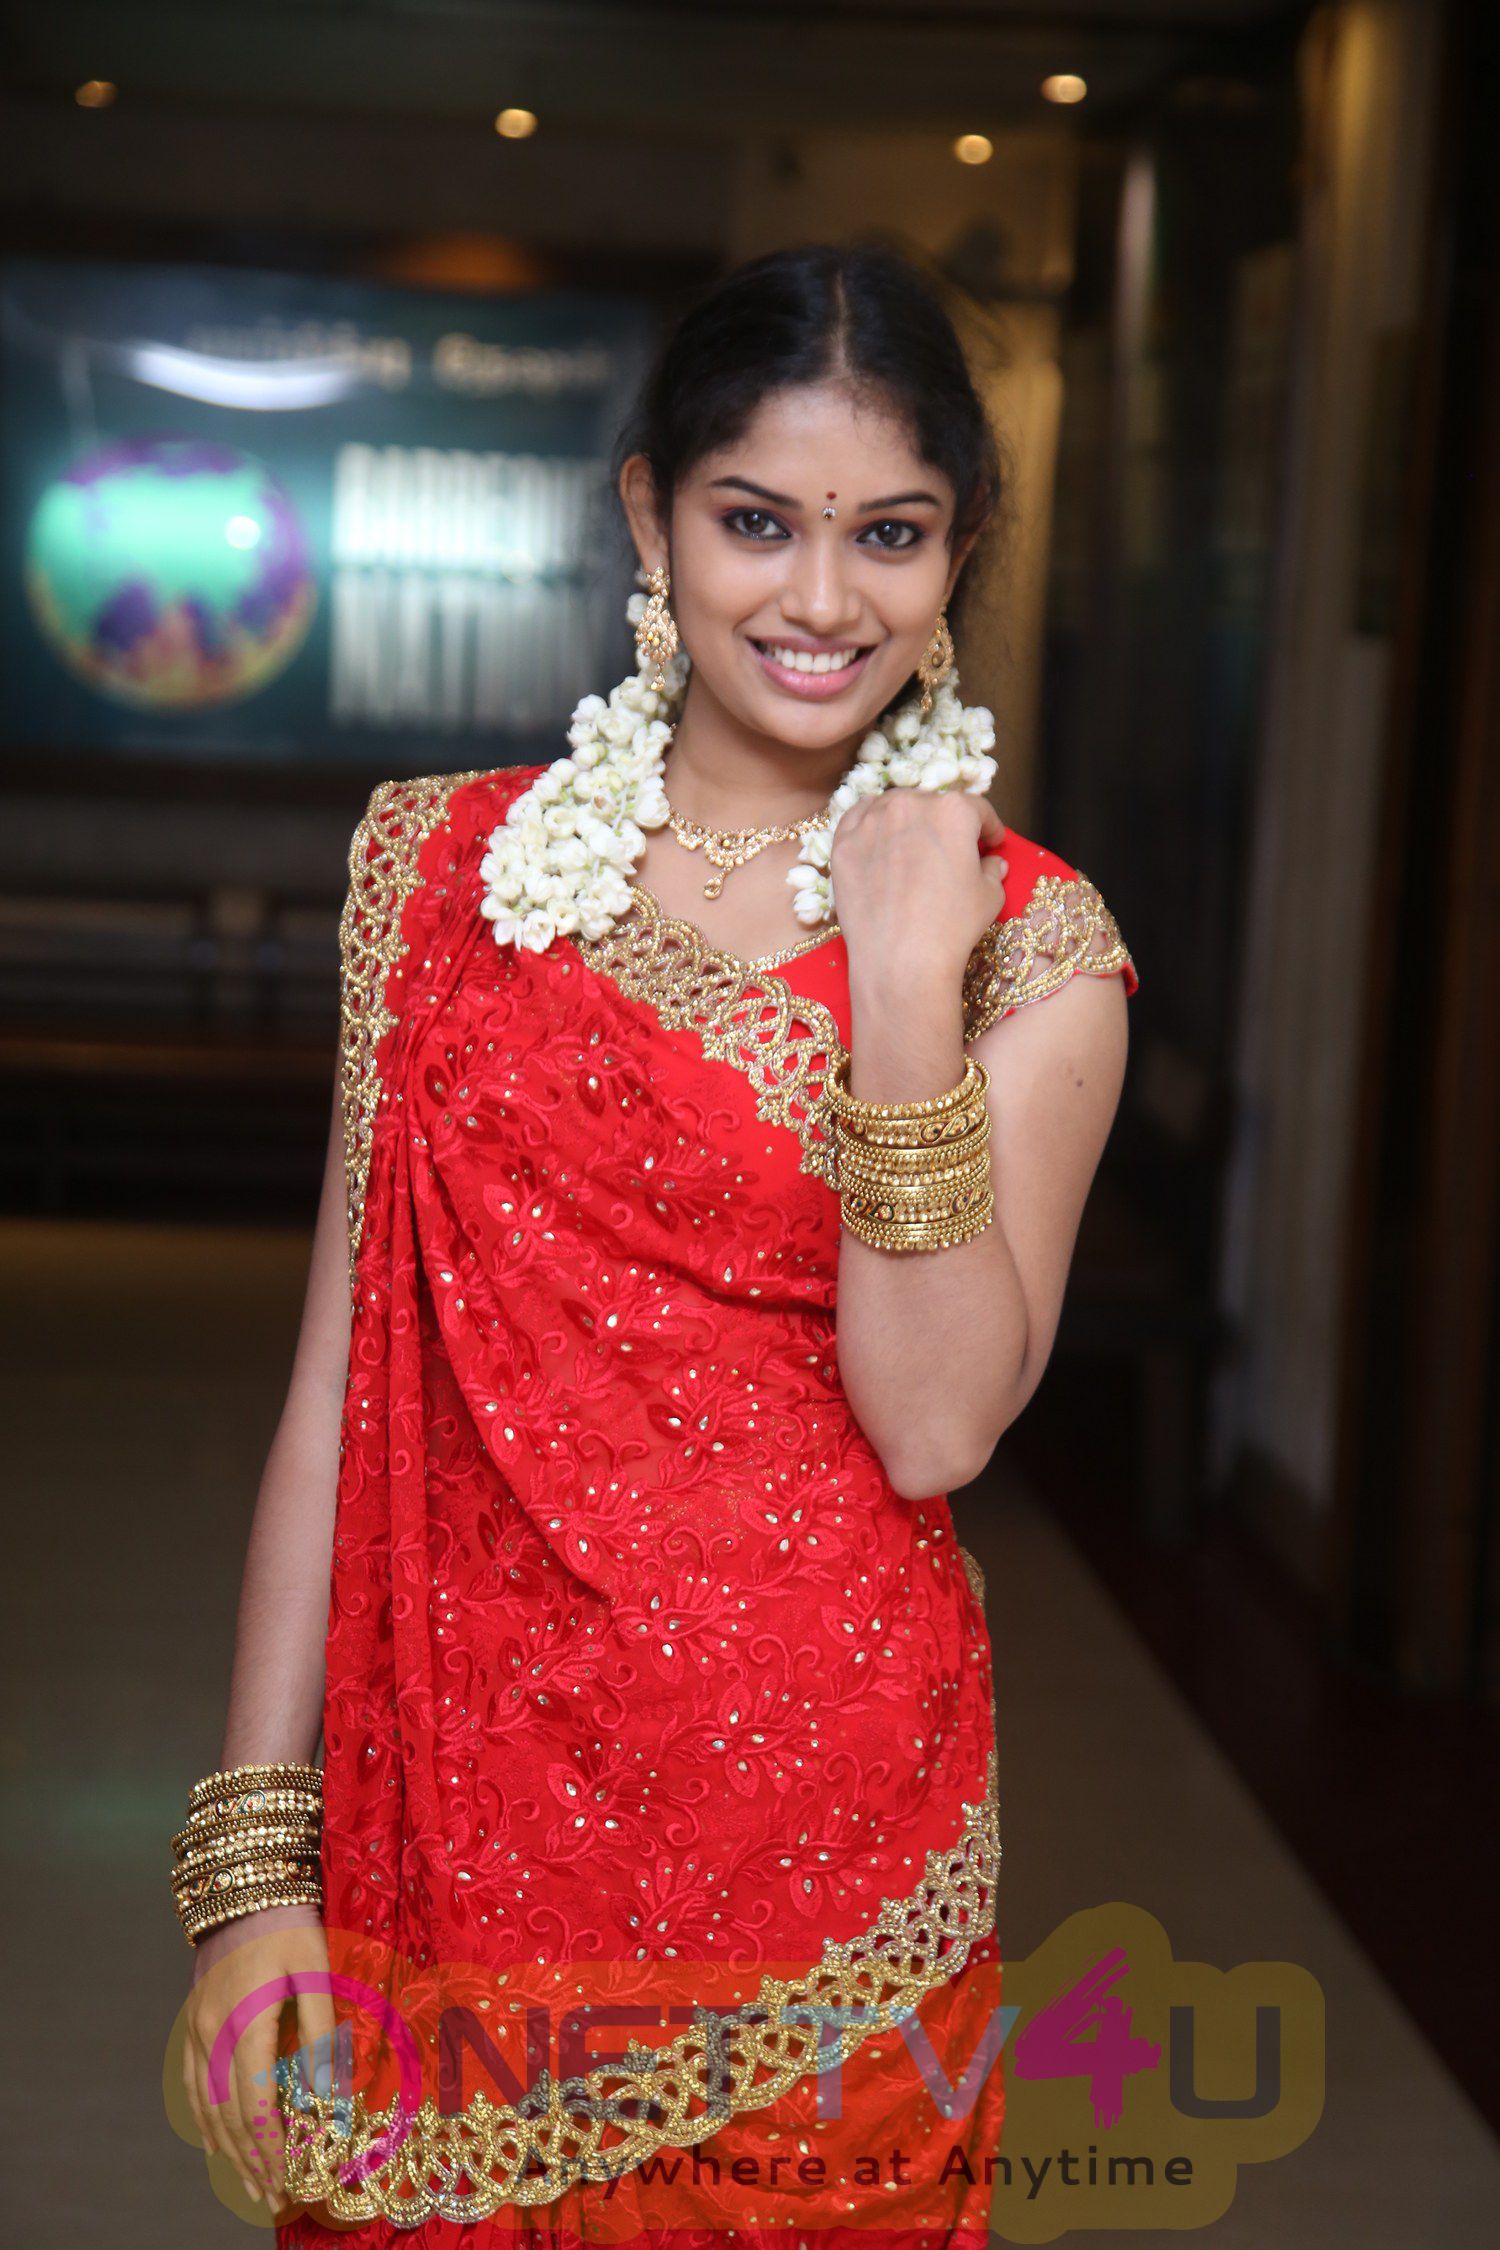 Photos Of Actress Shree Ja Launches My Grand Wedding Mobile App Tamil Gallery